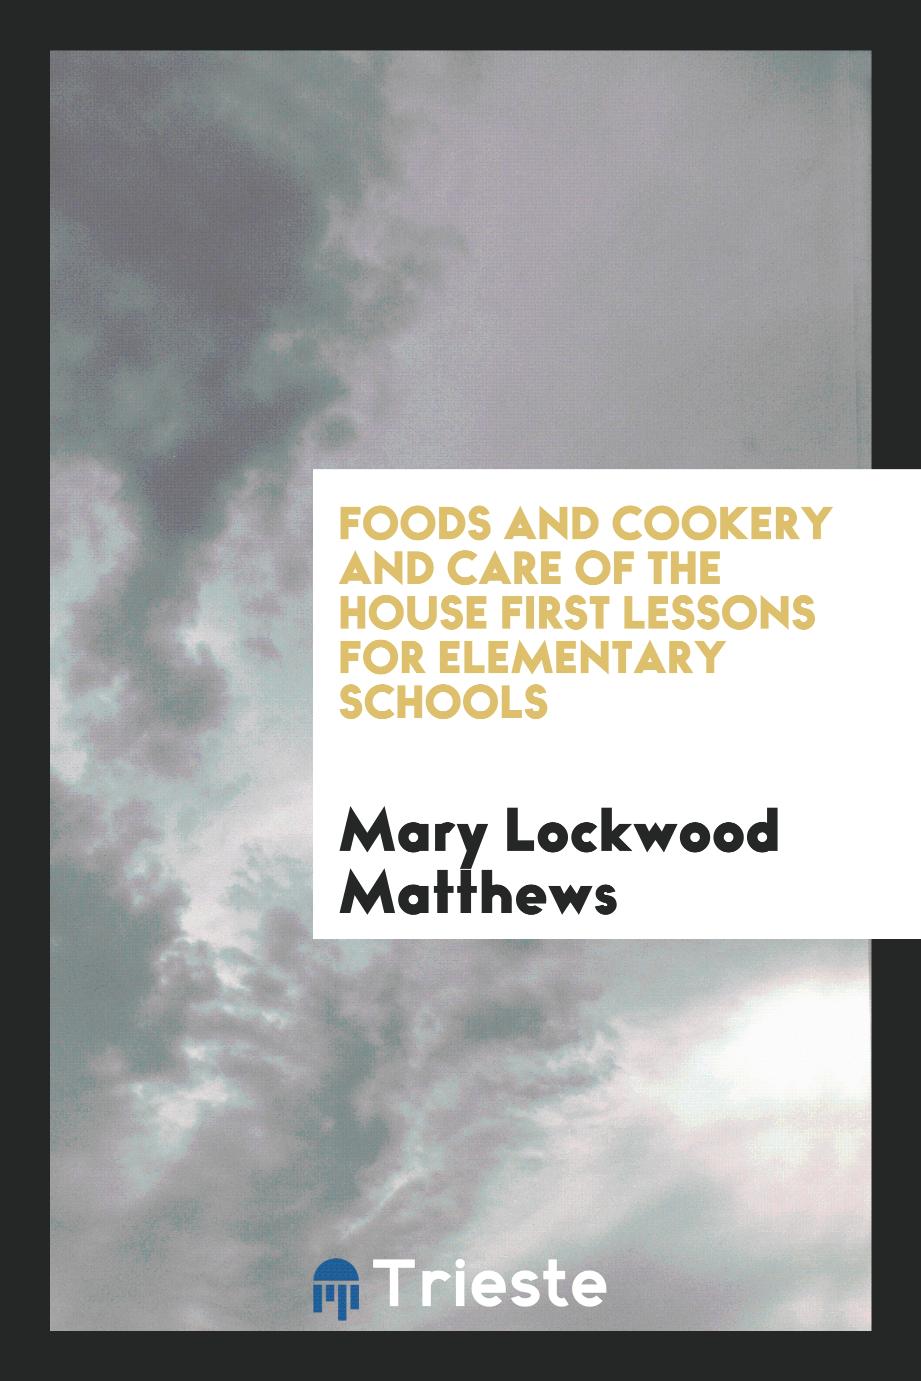 Foods and cookery and care of the house First lessons for elementary schools